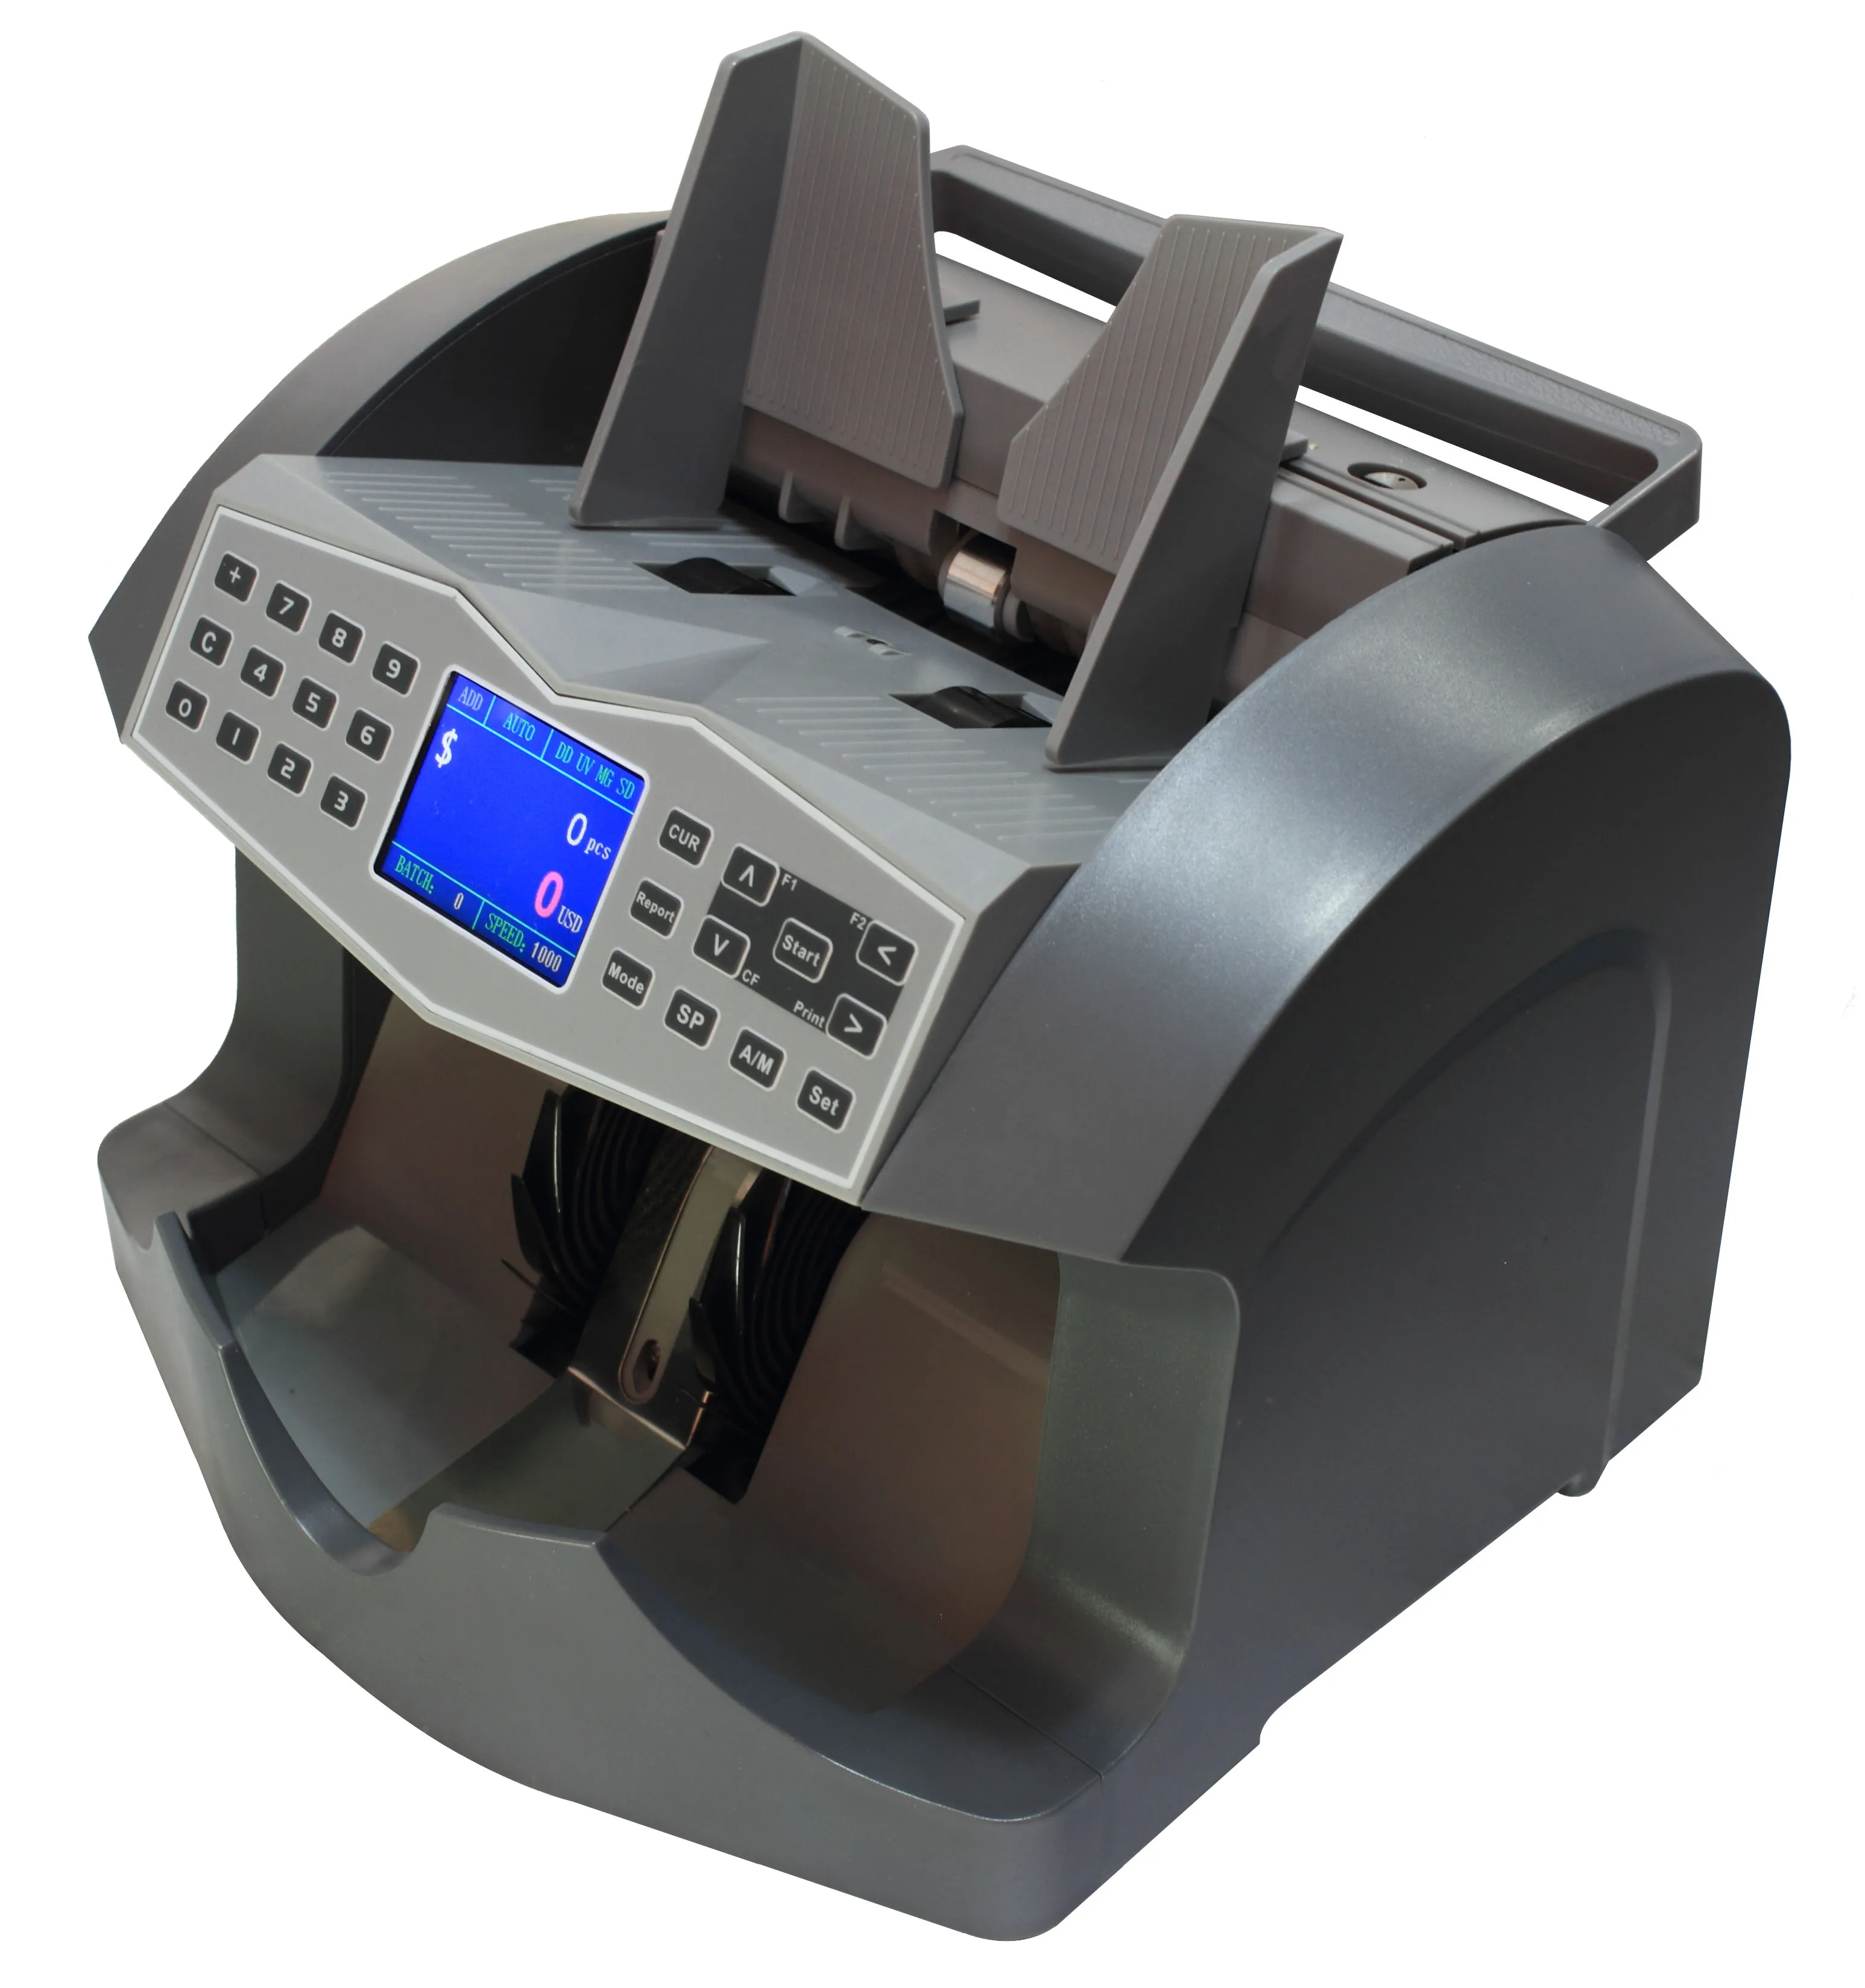 
hotsell currency counting machine/mixed bill counter/ bill counting machine  (62240967168)